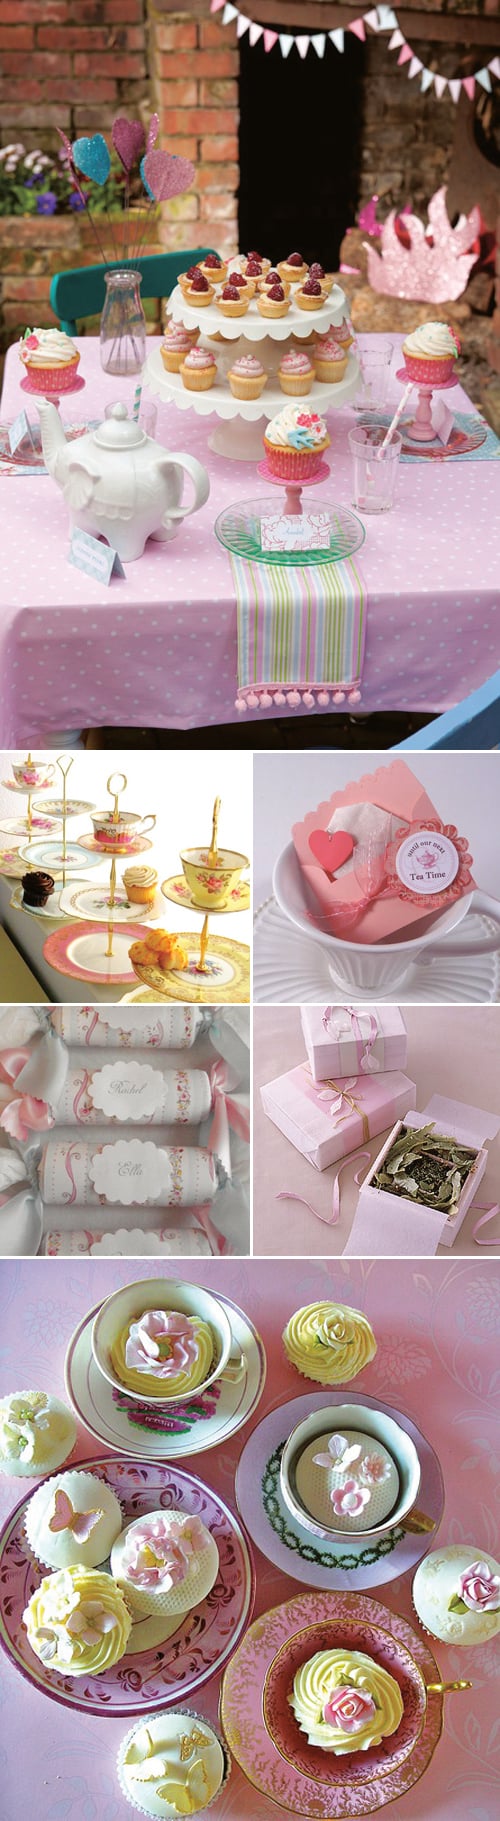 Tea Party Birthday Party Inspiration and Ideas